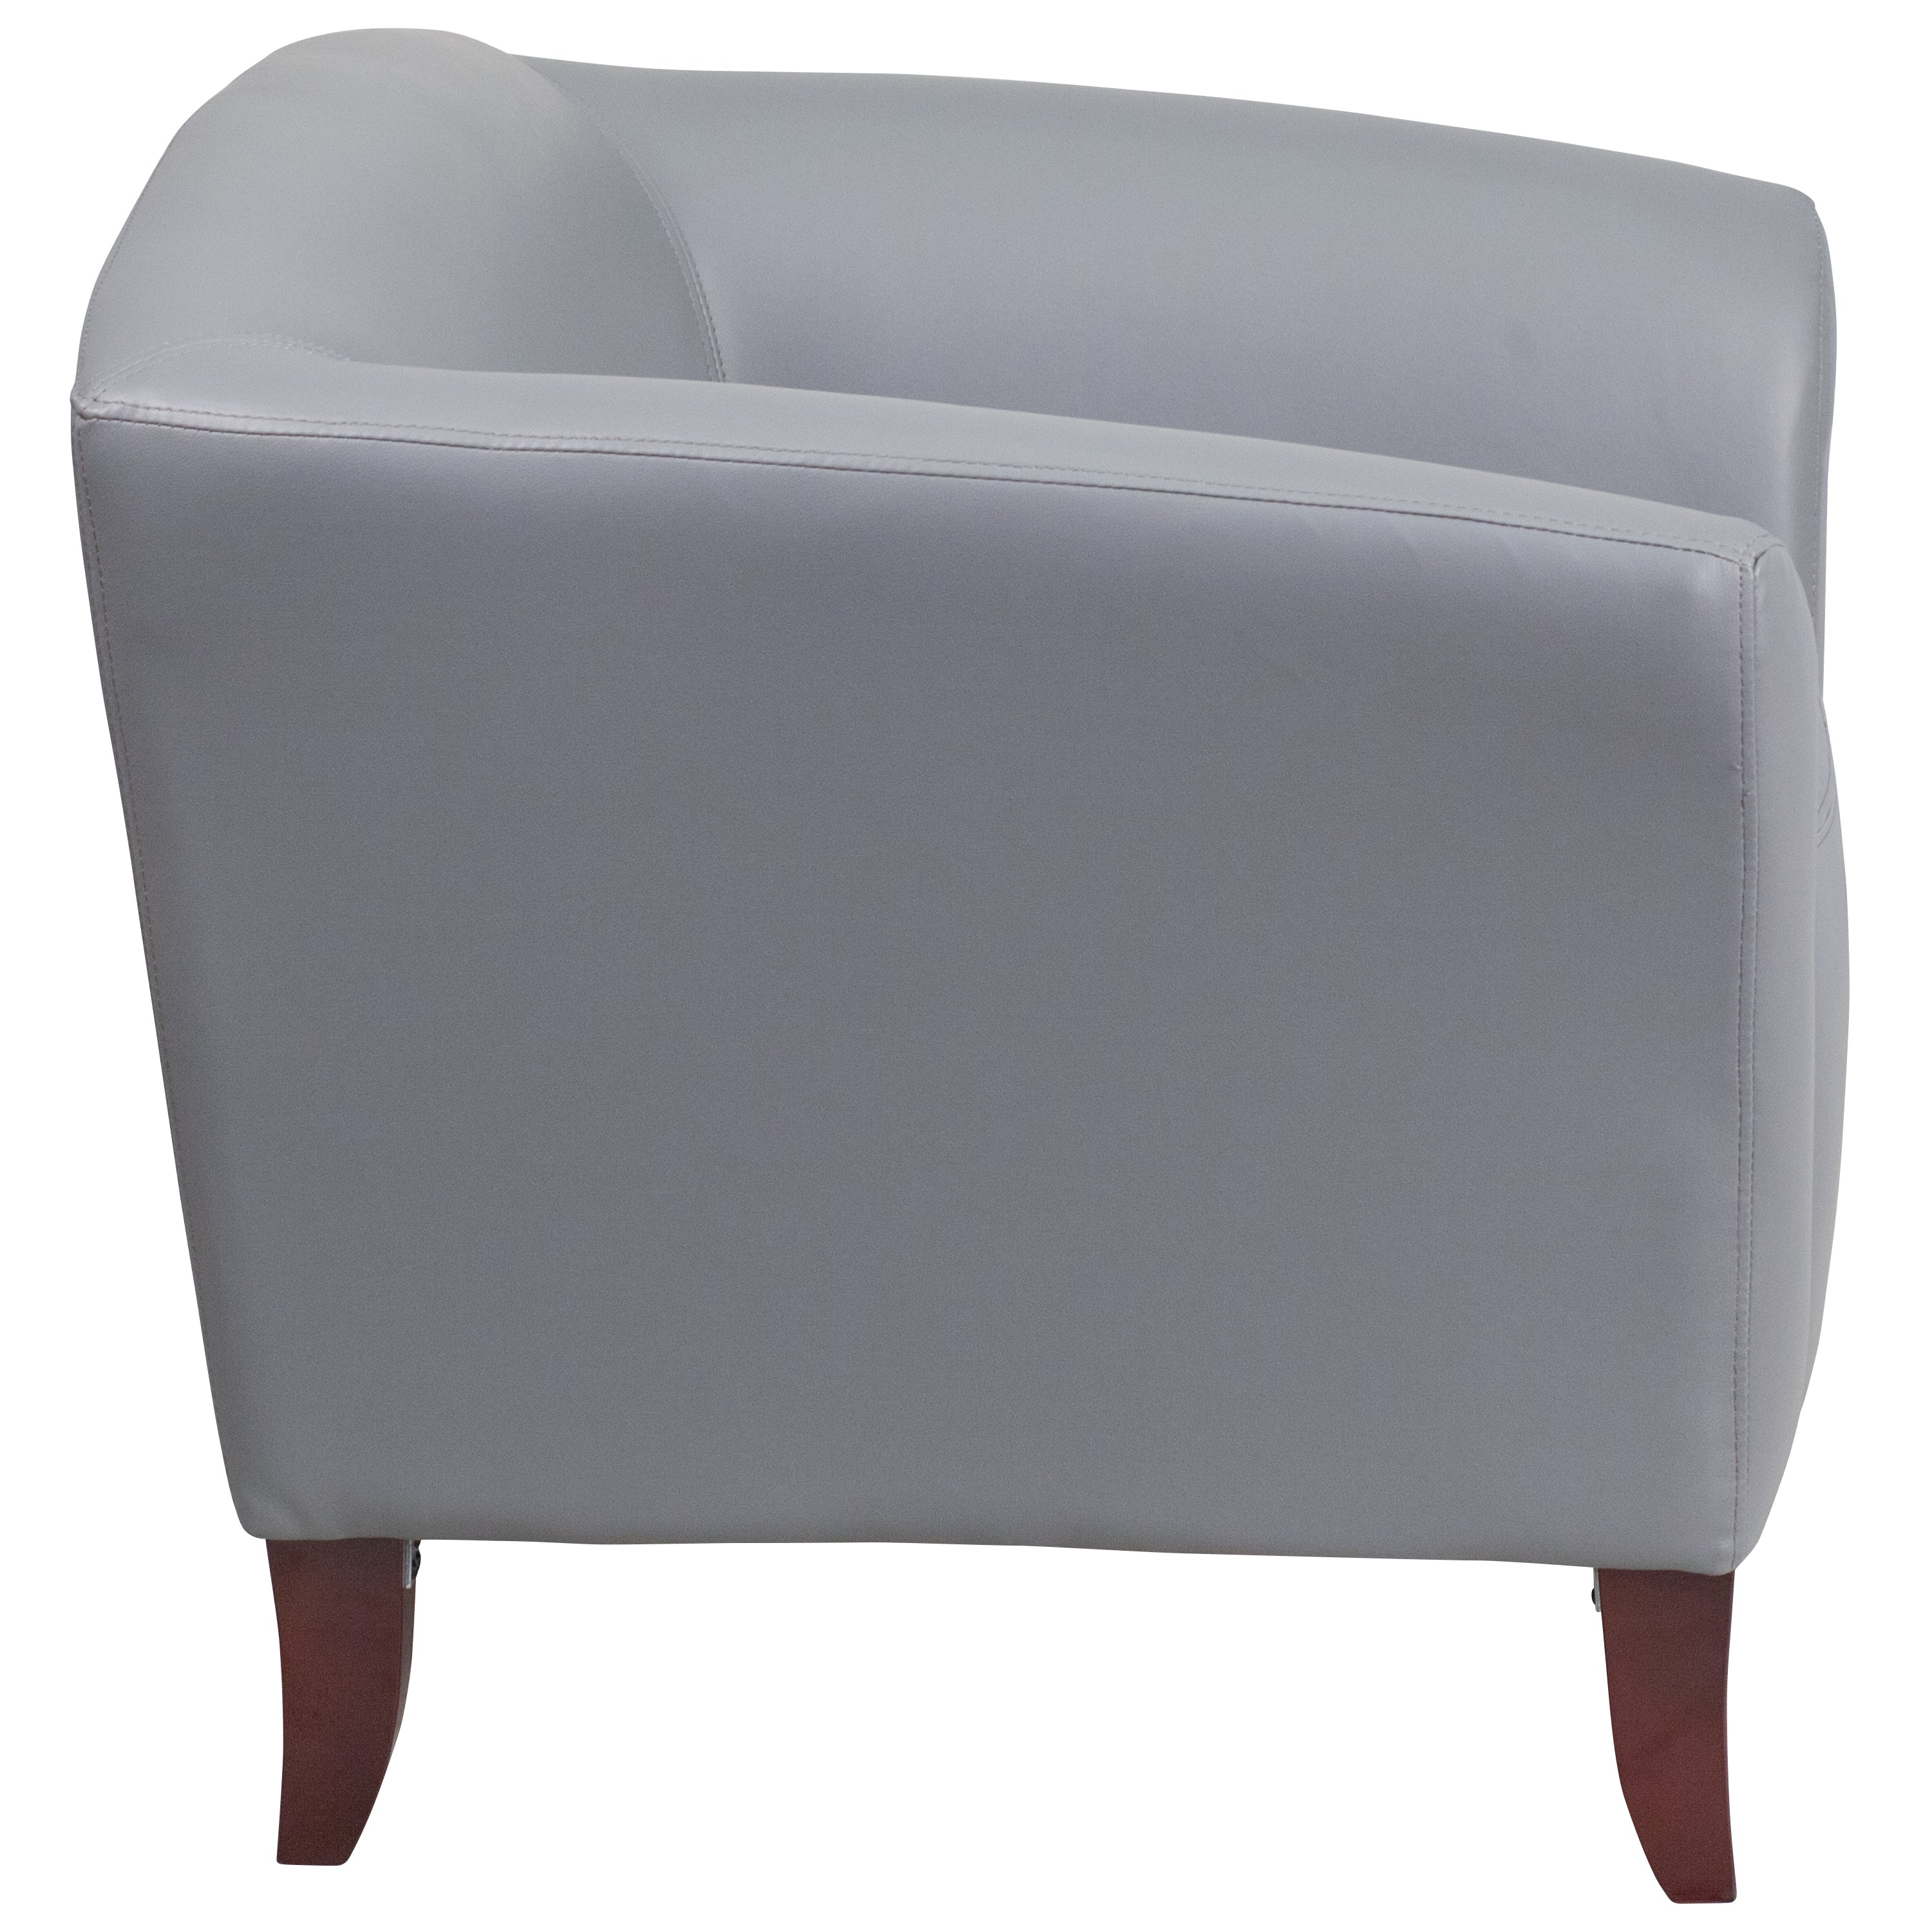 HERCULES Imperial Series LeatherSoft Chair with Cherry Wood Feet-Reception Chair-Flash Furniture-Wall2Wall Furnishings